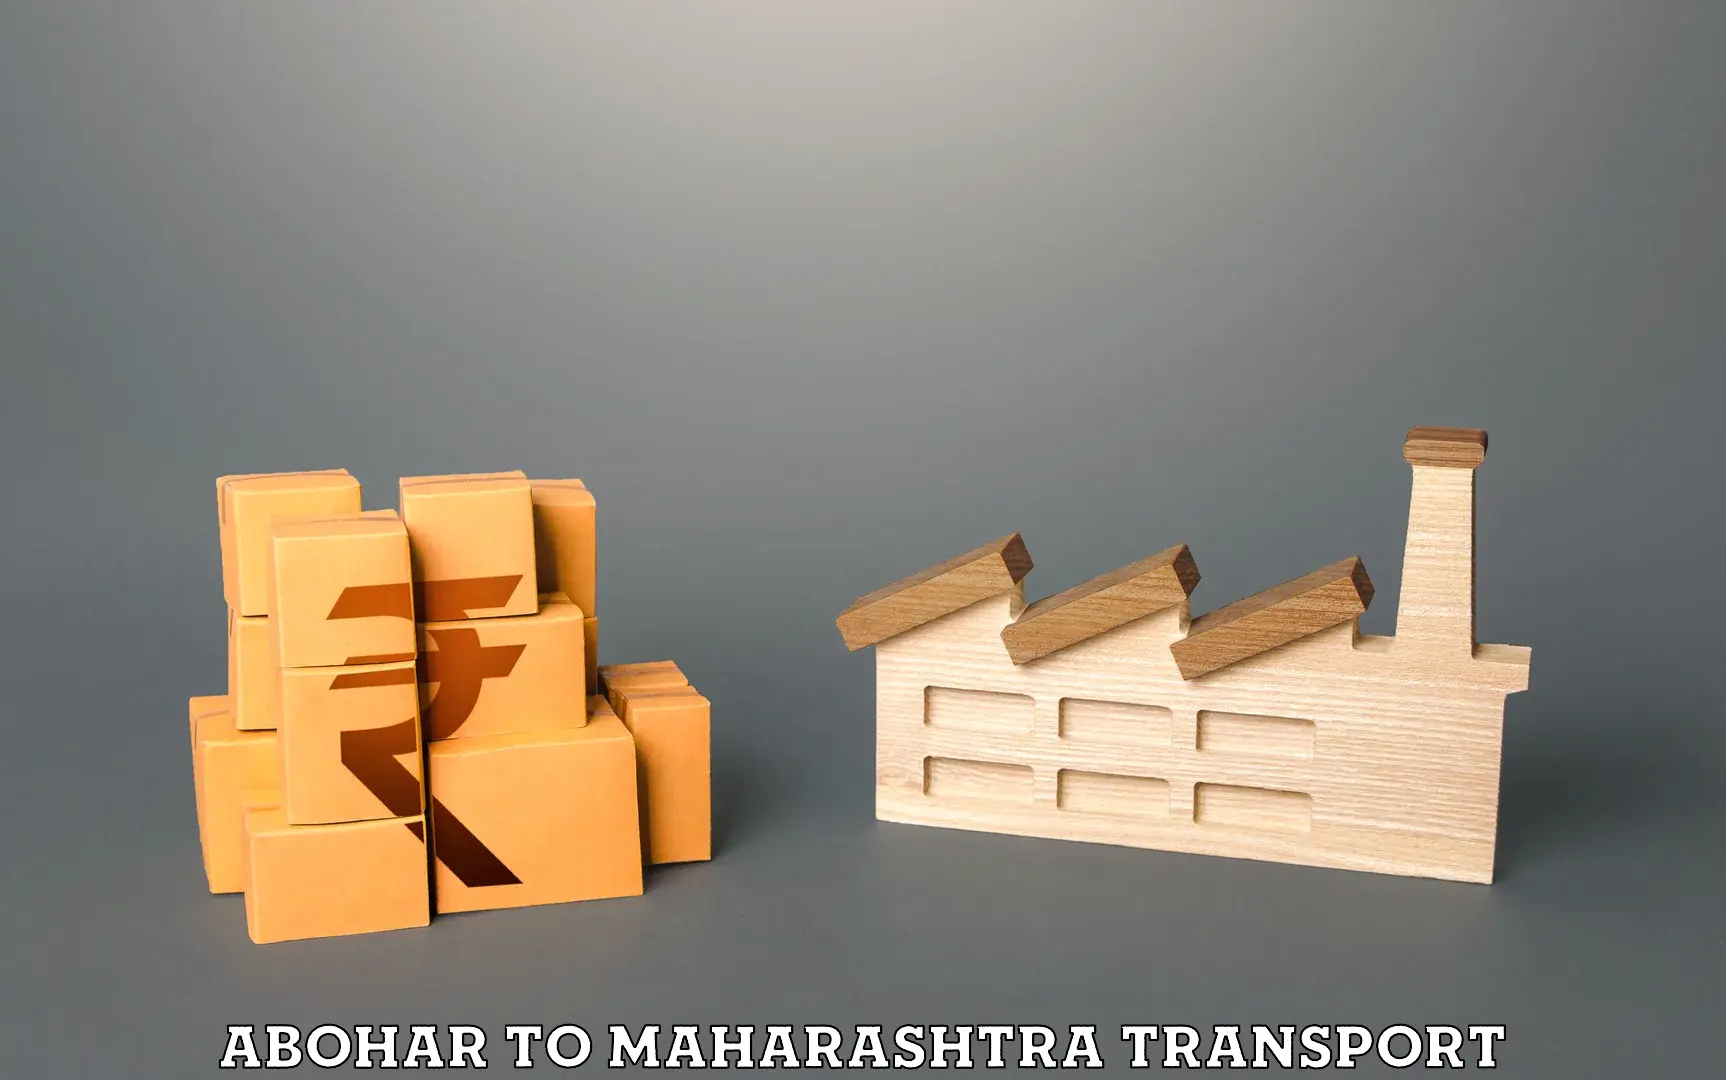 Truck transport companies in India Abohar to Barshi